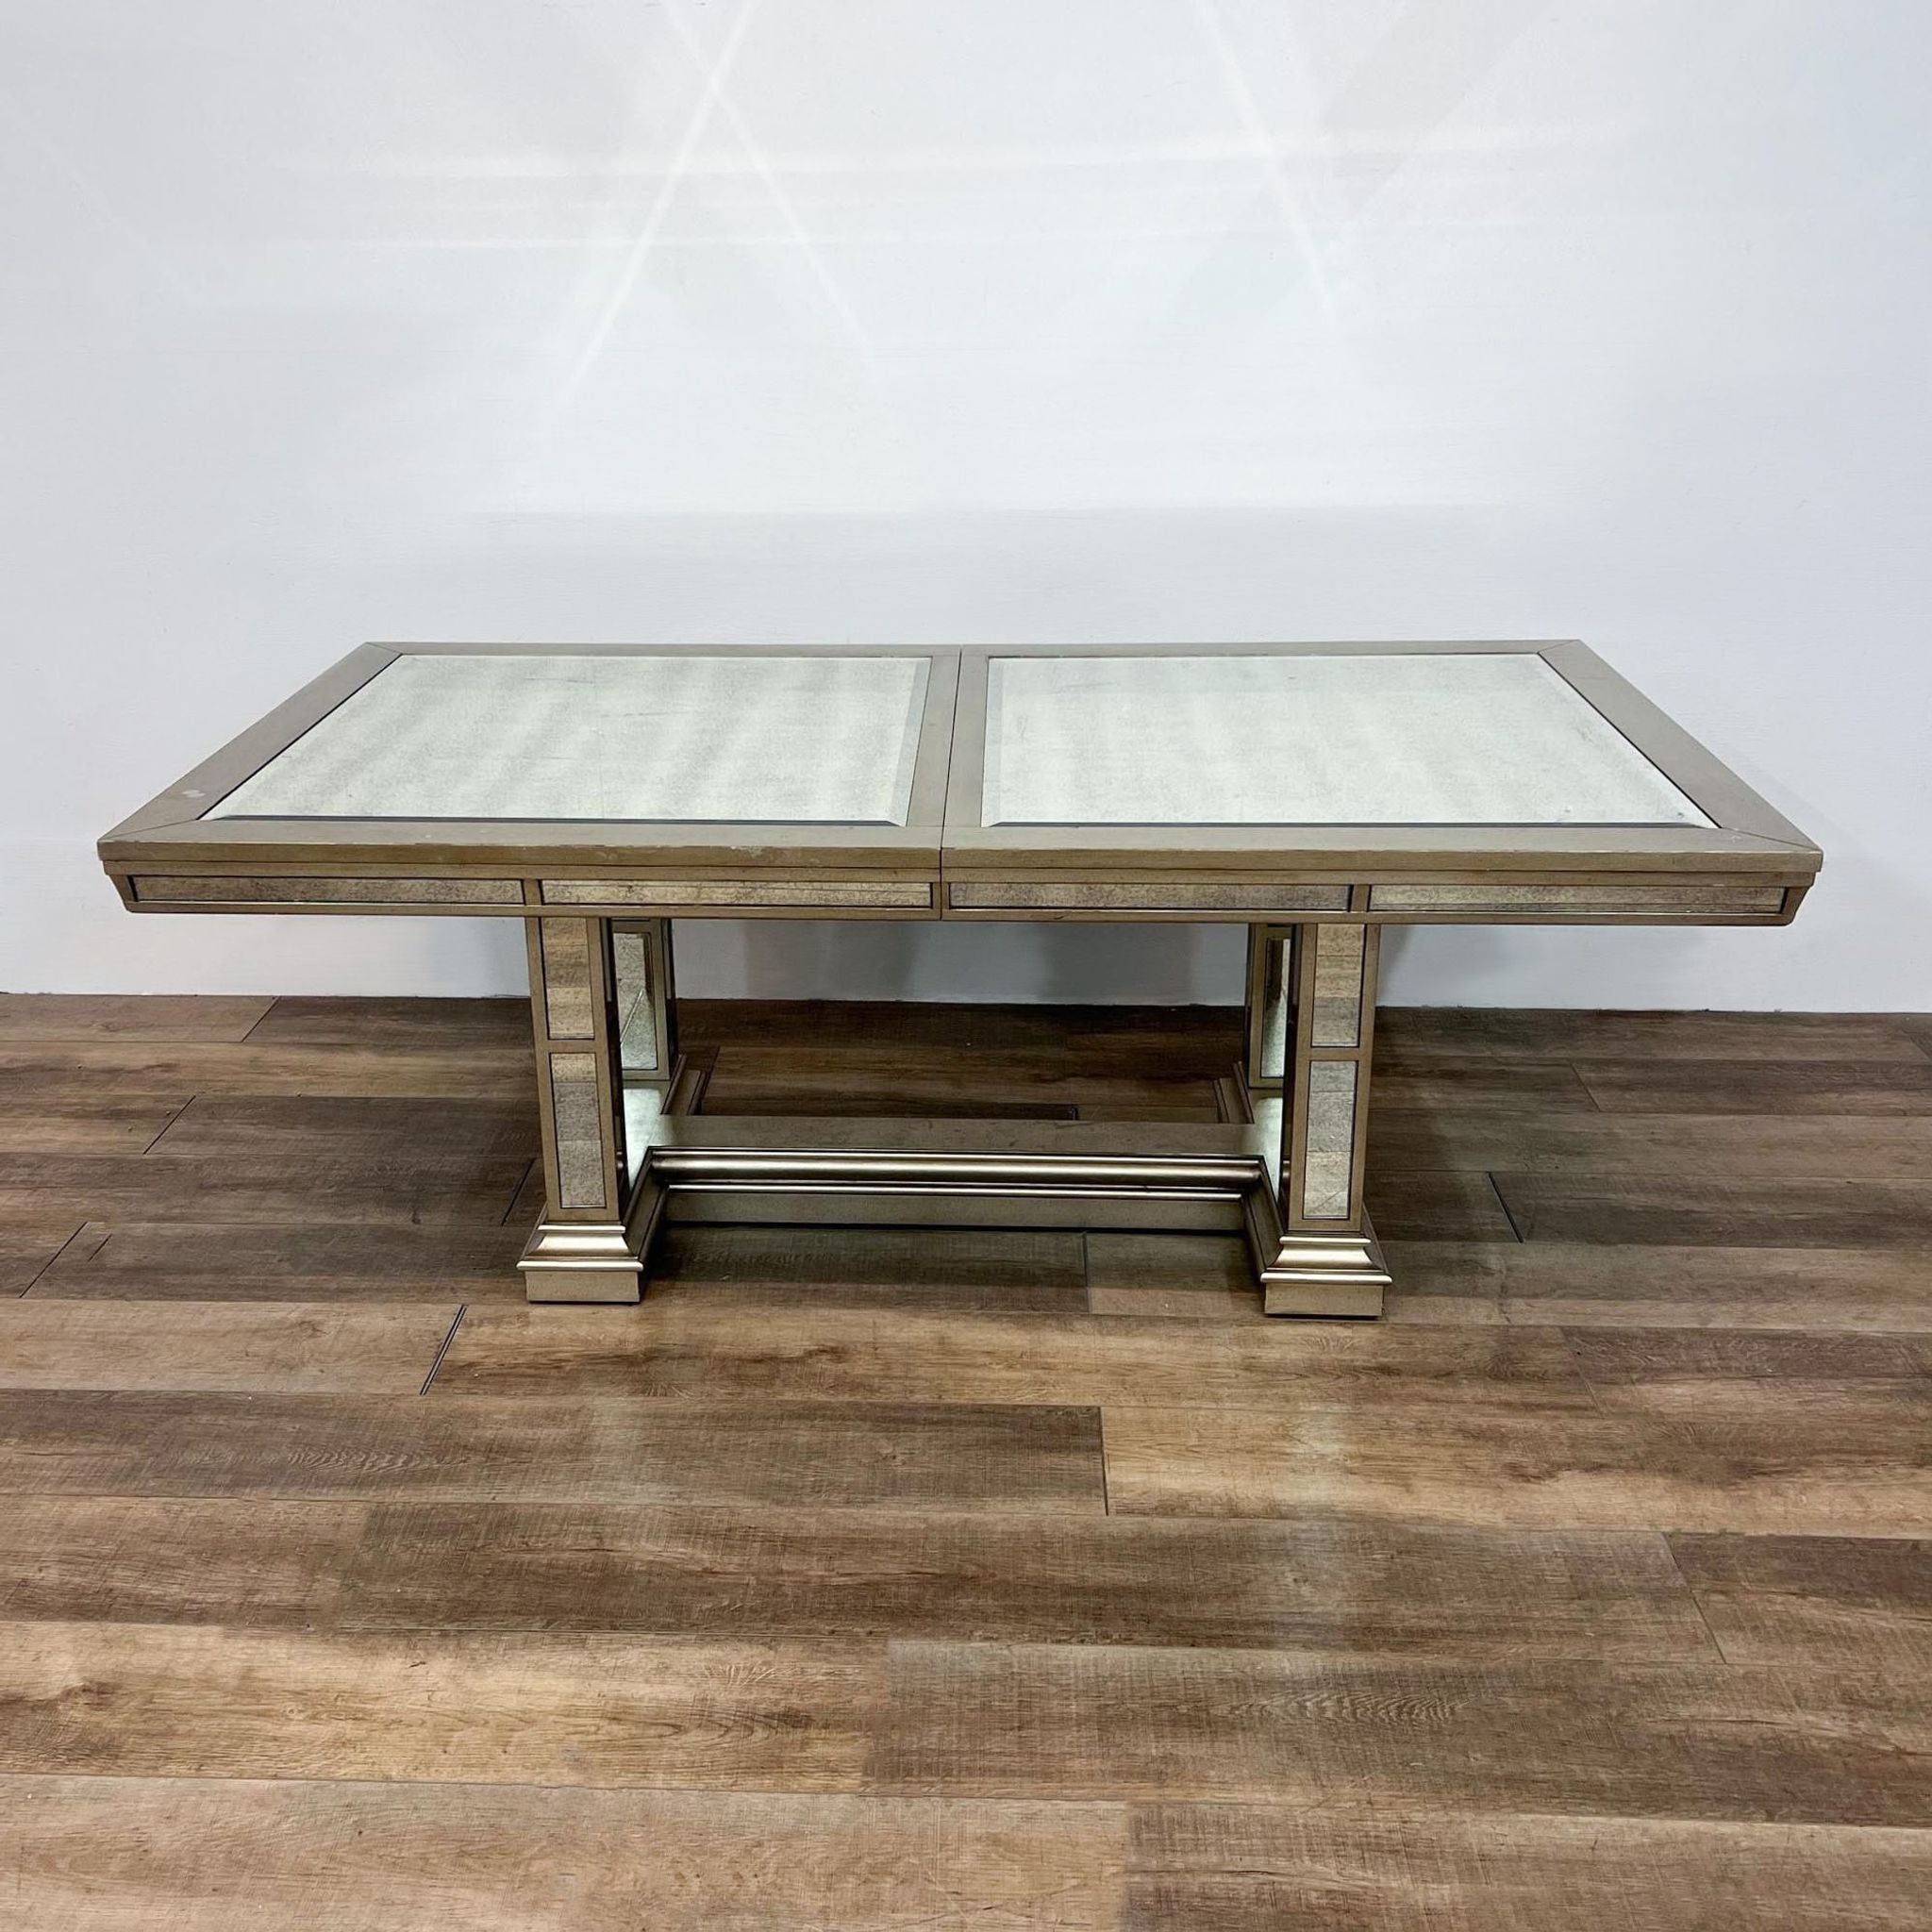 Alt text 2: X-Gallerie dining set featuring an expandable hardwood table with mirrored panels and metallic trim, accompanied by diamond-tufted grey velvet chairs.